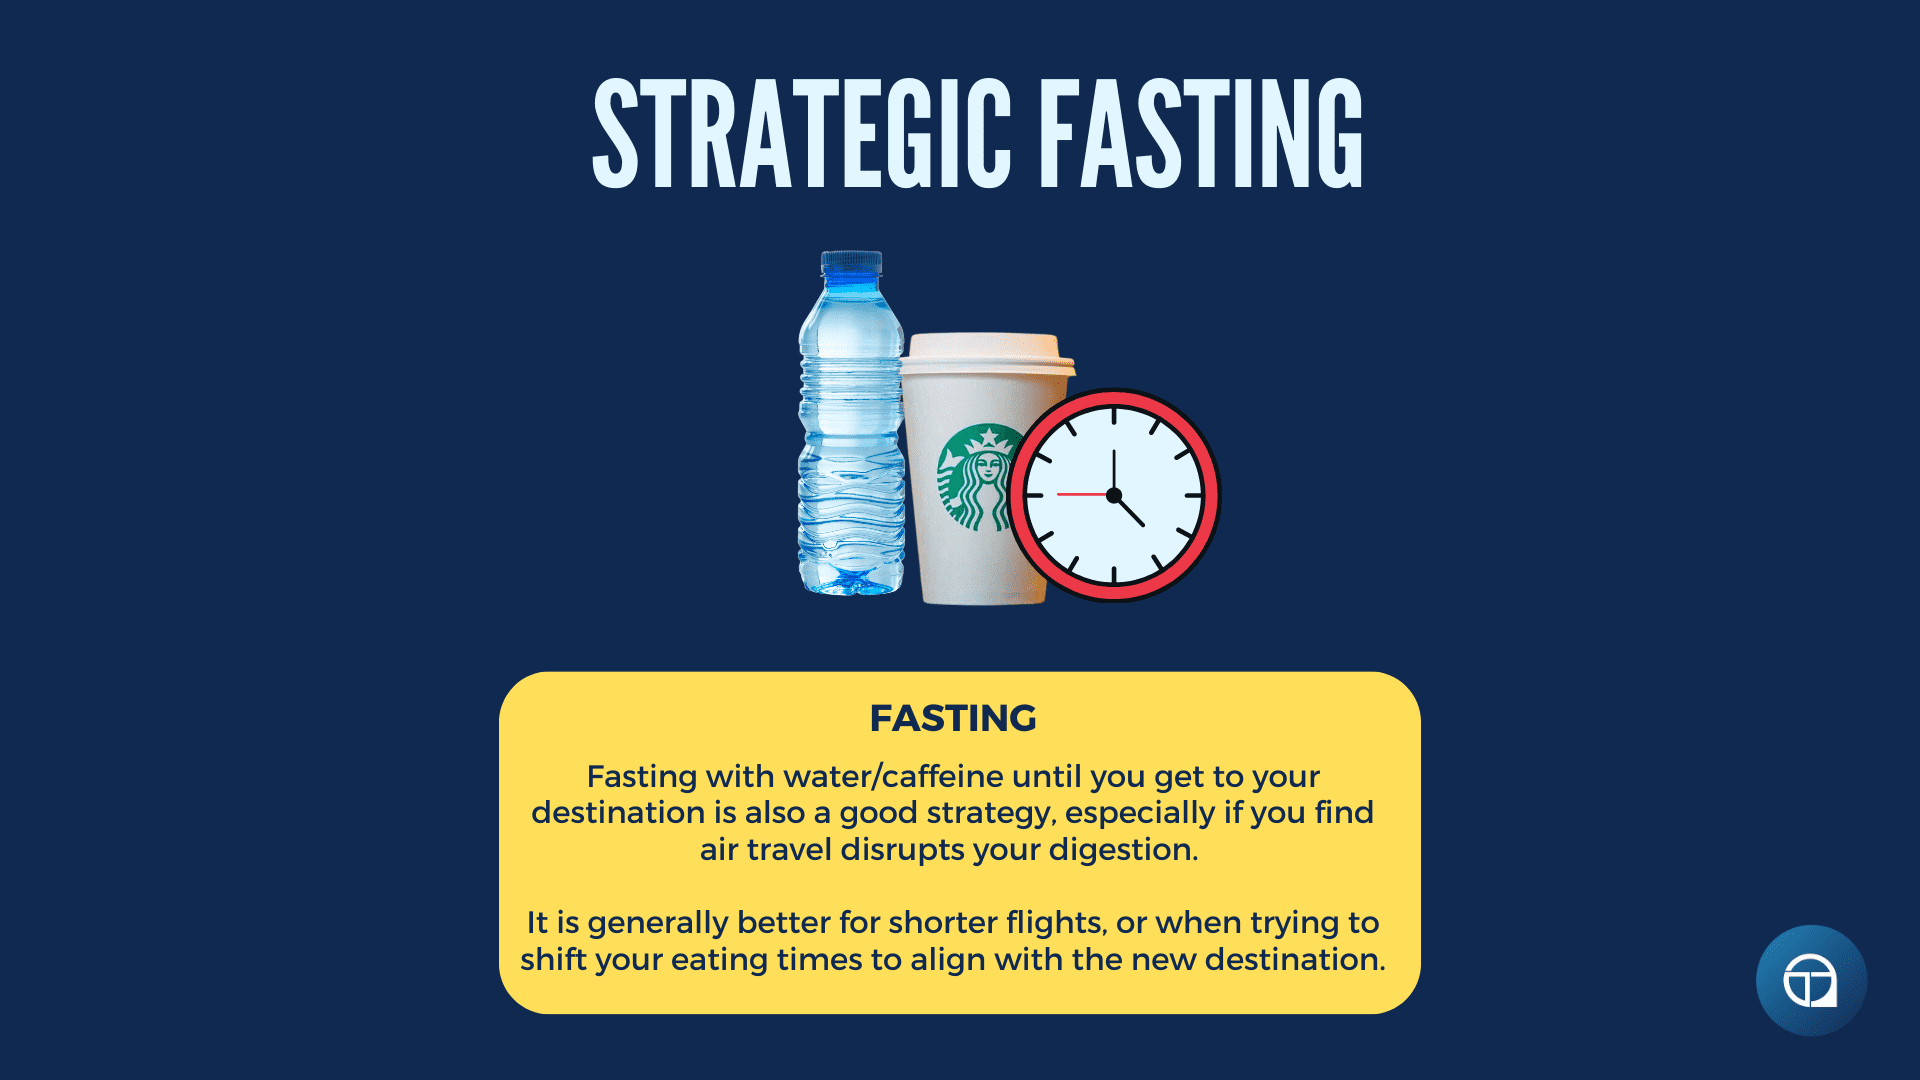 strategic fasting while travelling